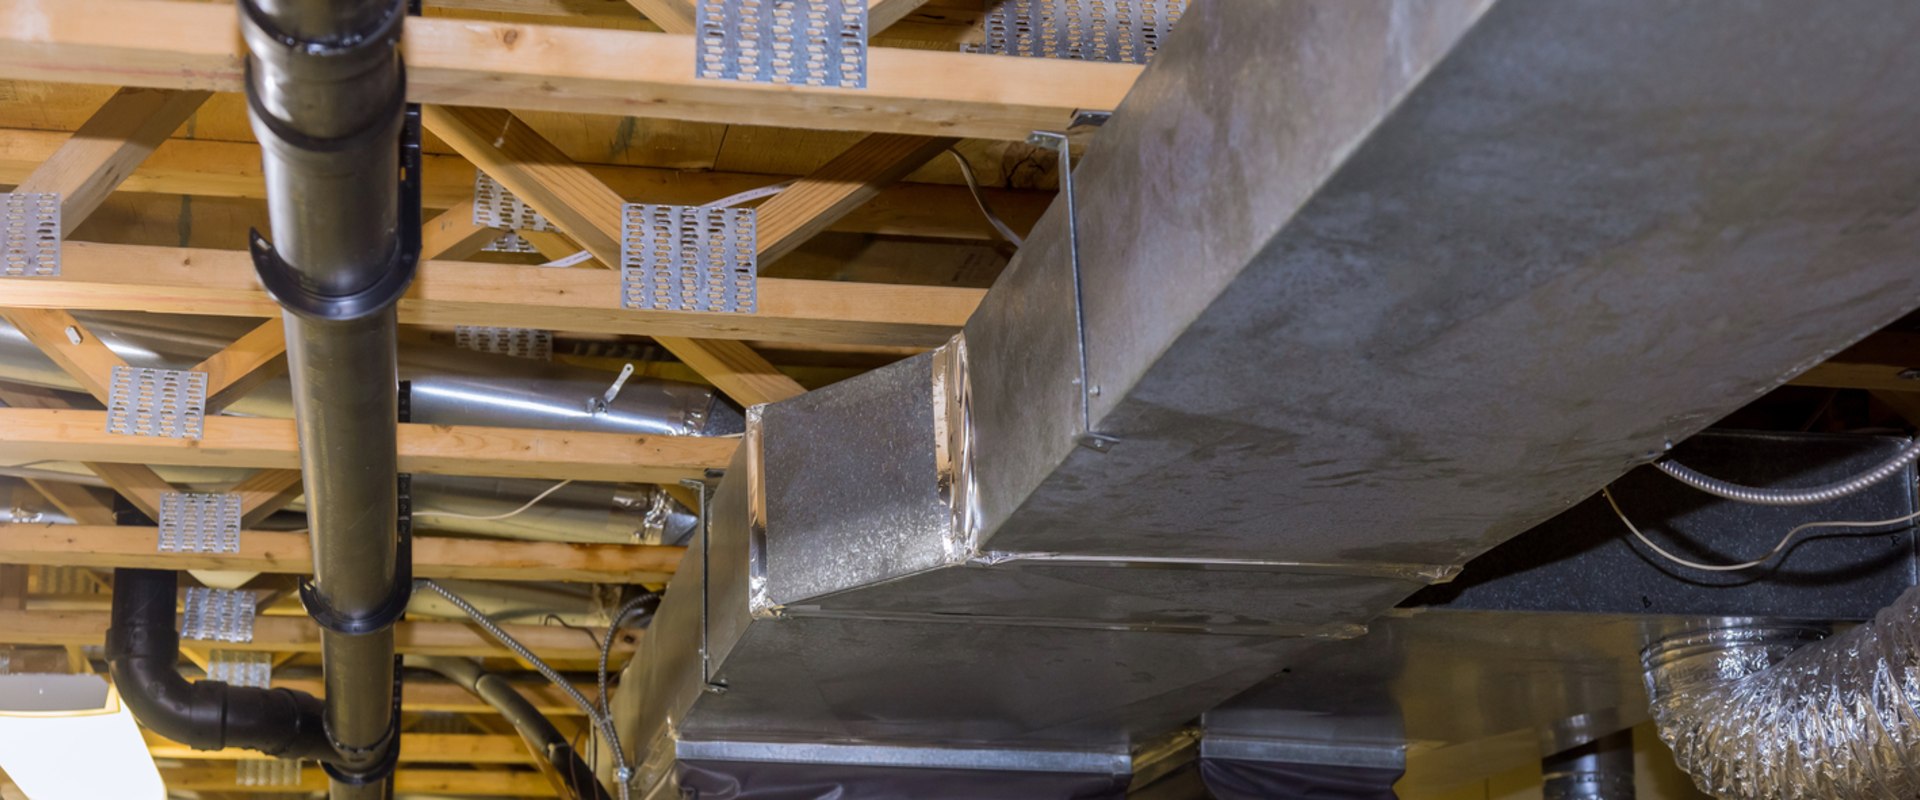 The Benefits of Duct Sealing Services: Energy Savings and More